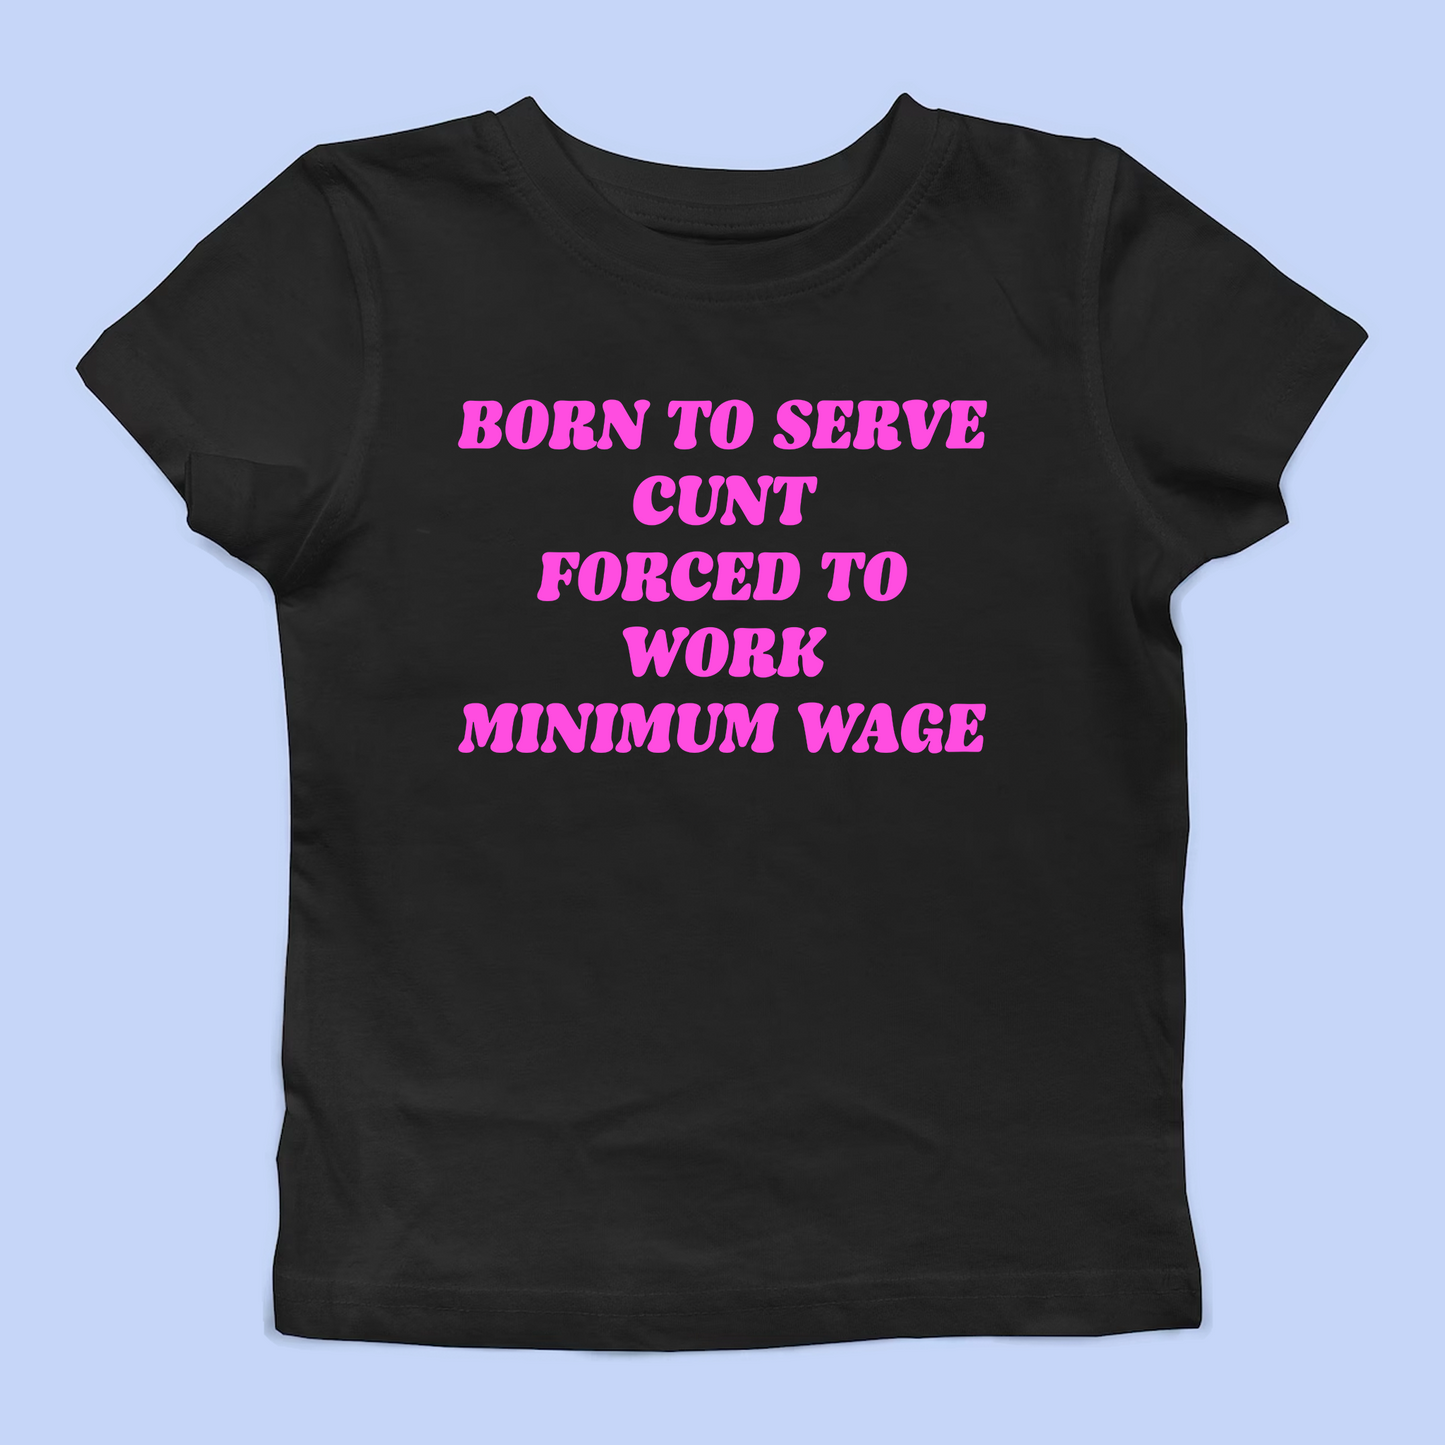 Born To Serve Cunt Baby Tee